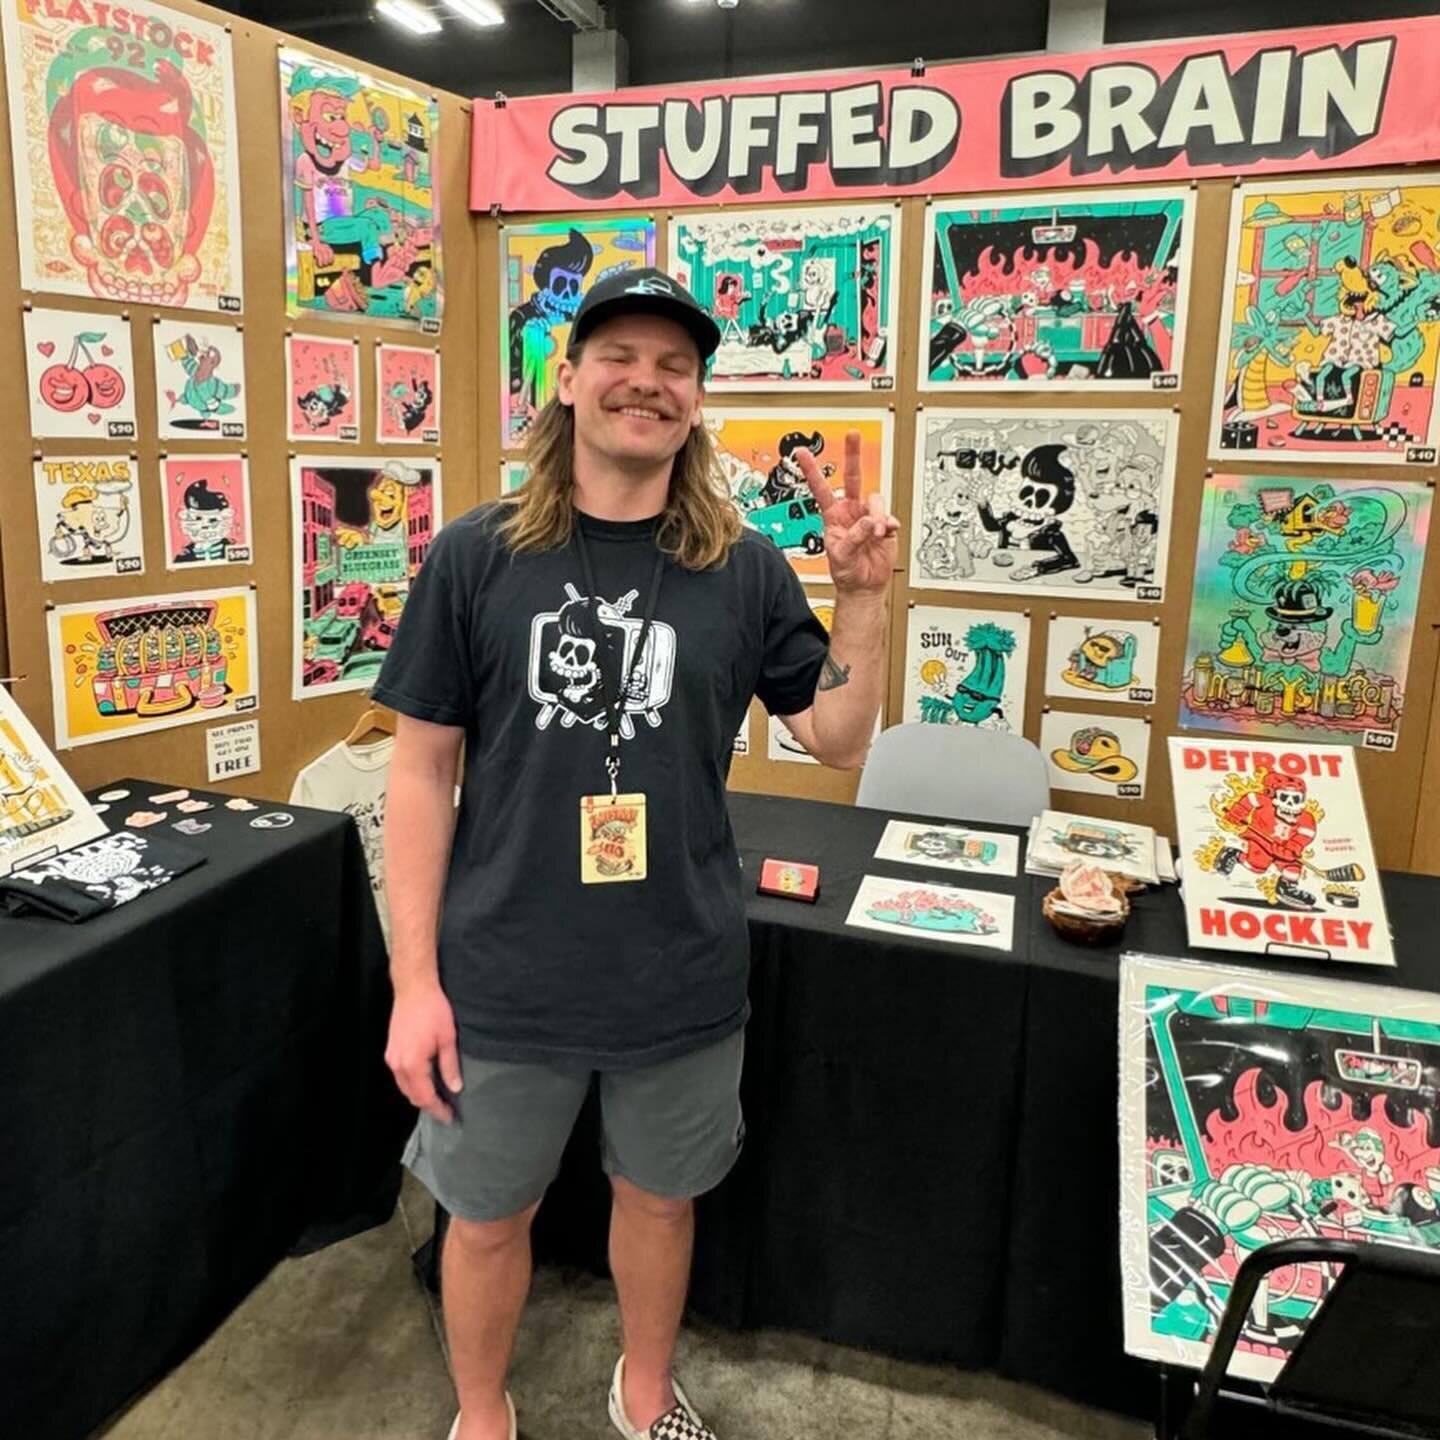 Too many good times, never enough photos! A BIG thank you to all the fine folks of @flatstock and @sxsw for making my first poster pilgrimage to Austin such an amazing experience. I&rsquo;d be hard-pressed to find a more welcoming and talented group 